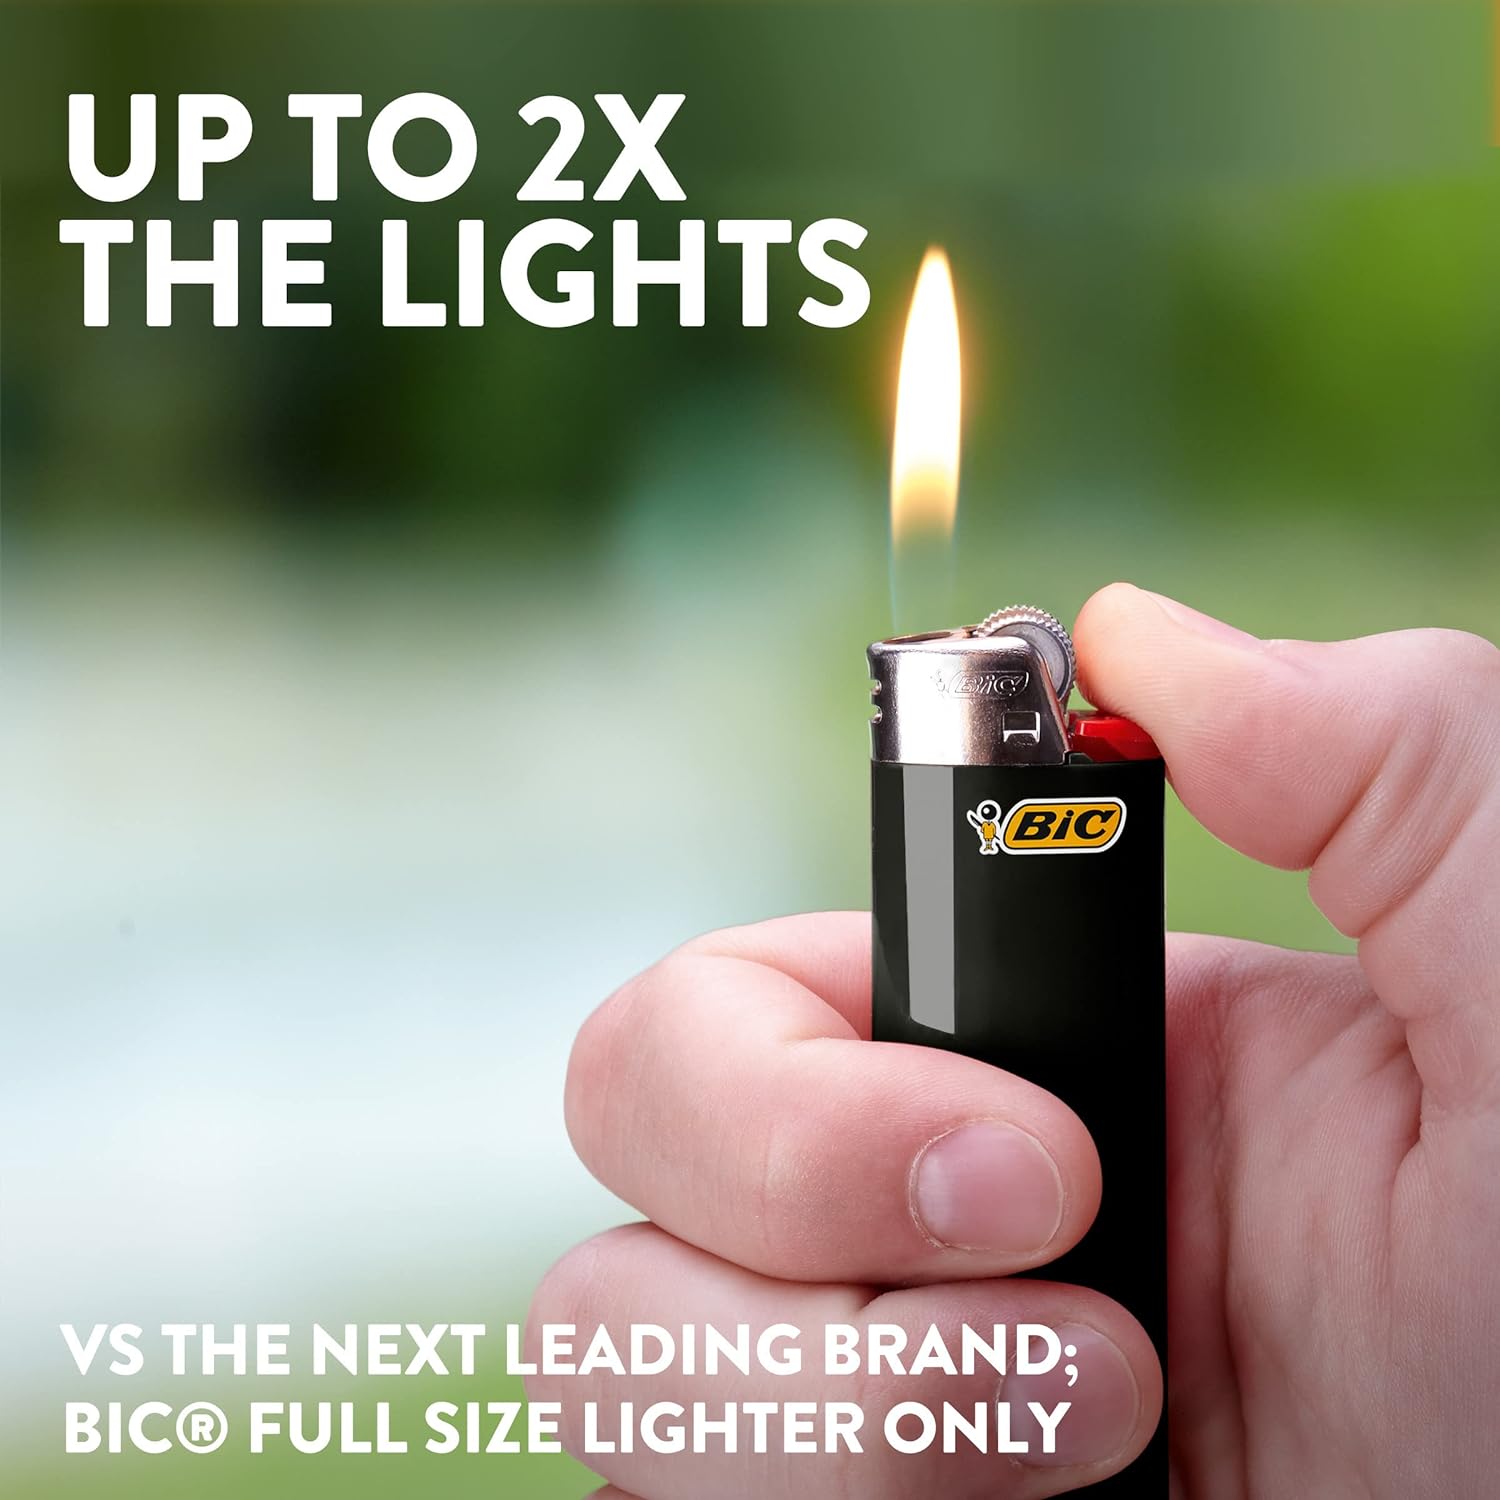 Great lighters, last long time. Great value. Will order more.